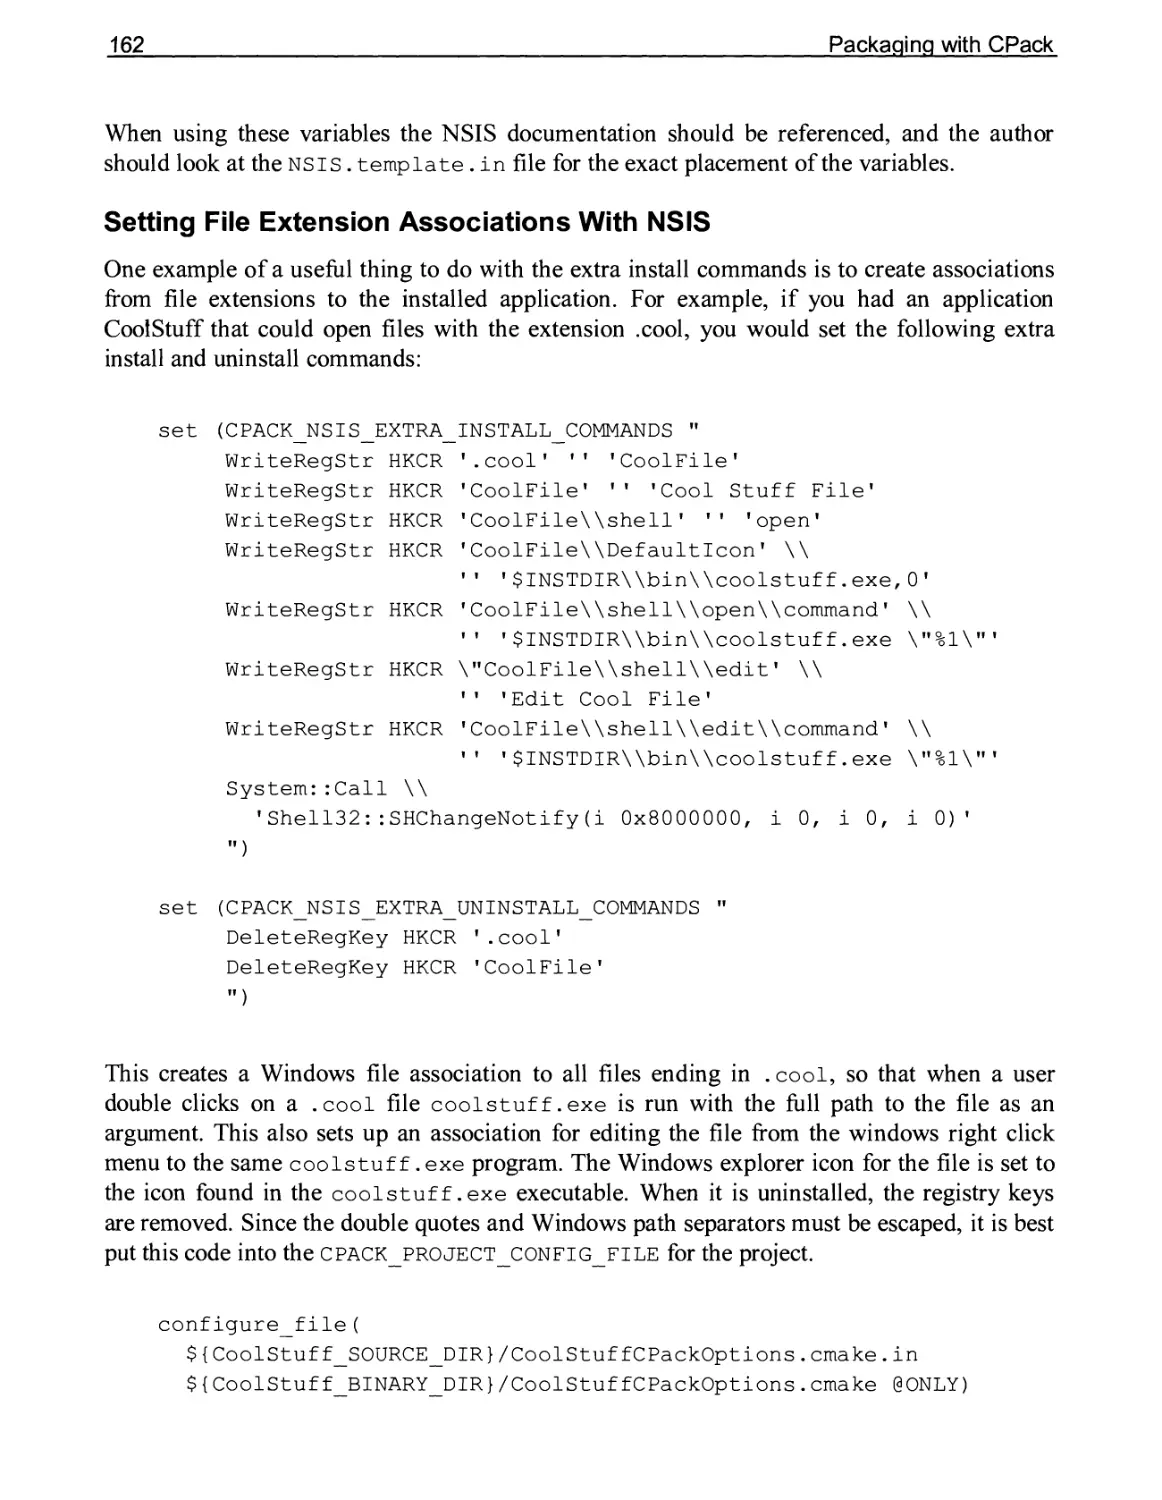 Setting File Extension Associations With NSIS